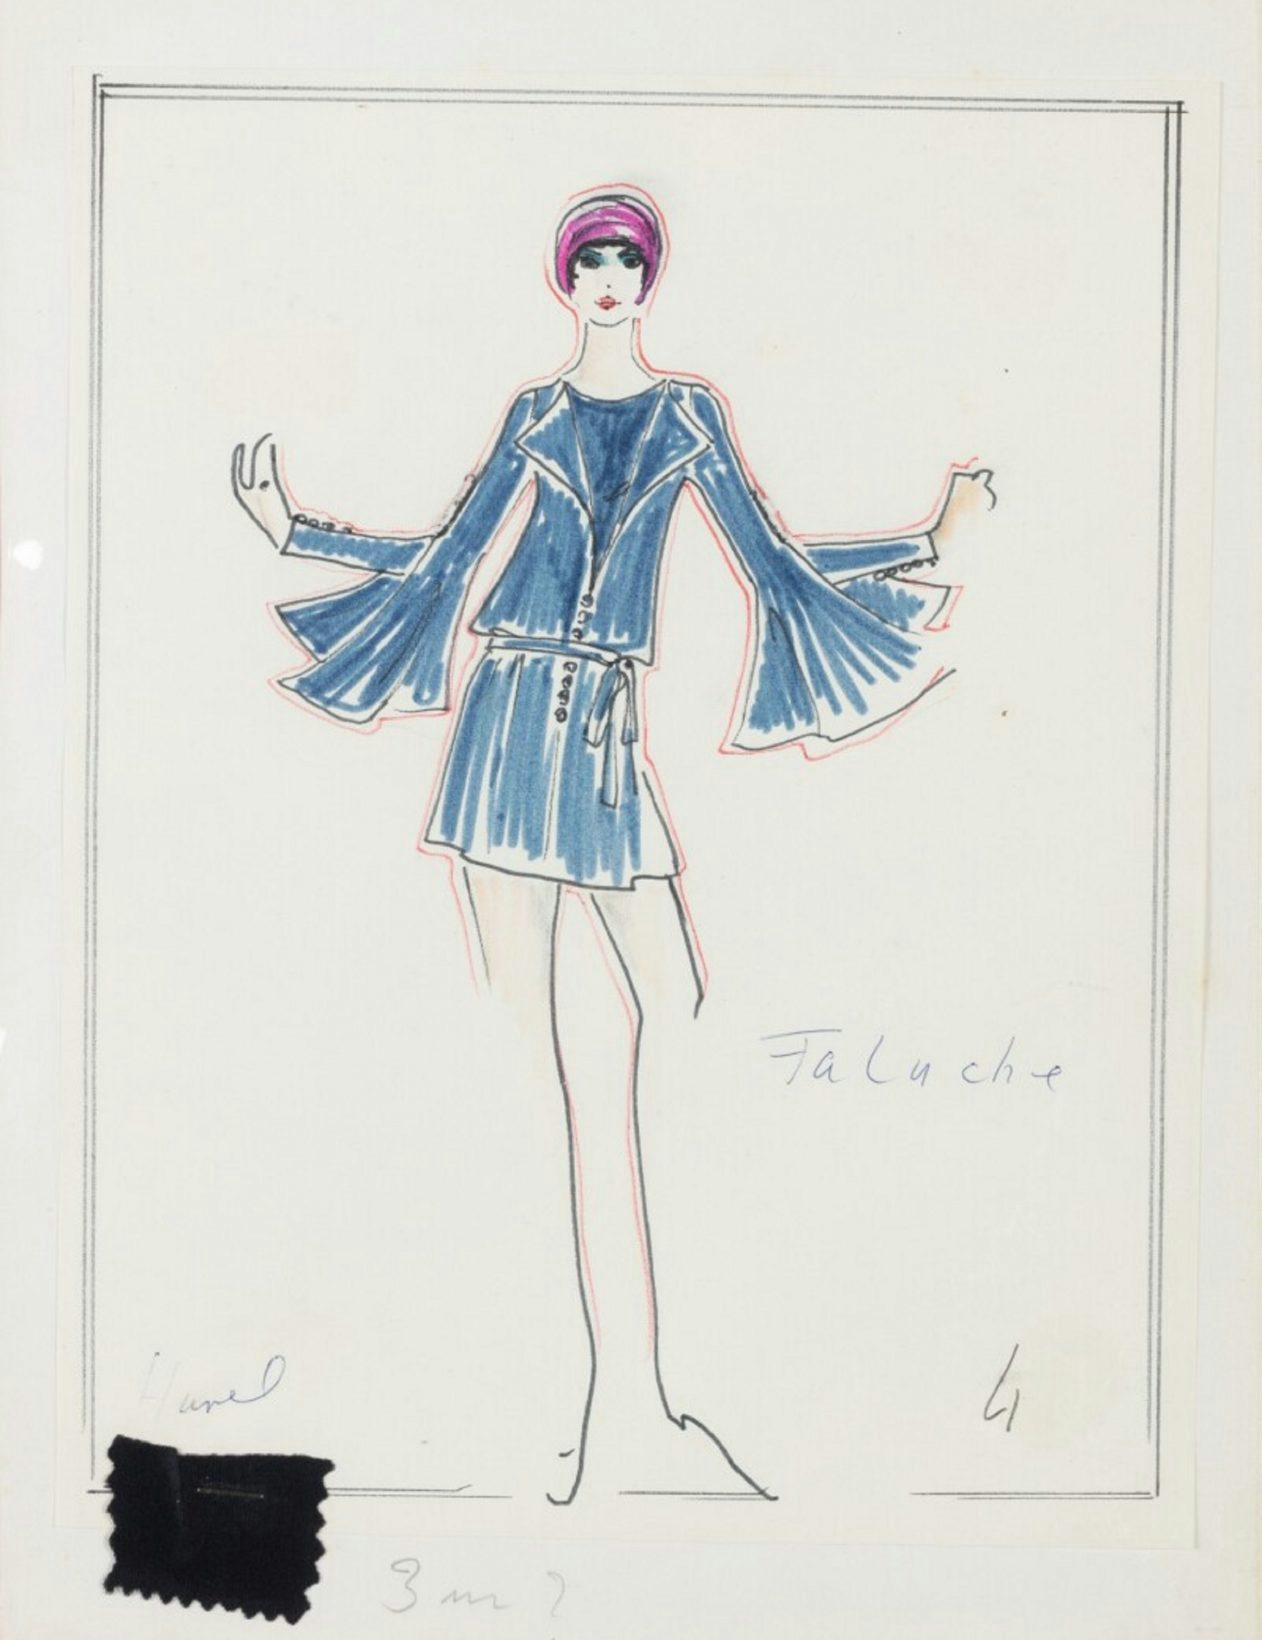 180 drawings by Karl Lagerfeld to be auctioned